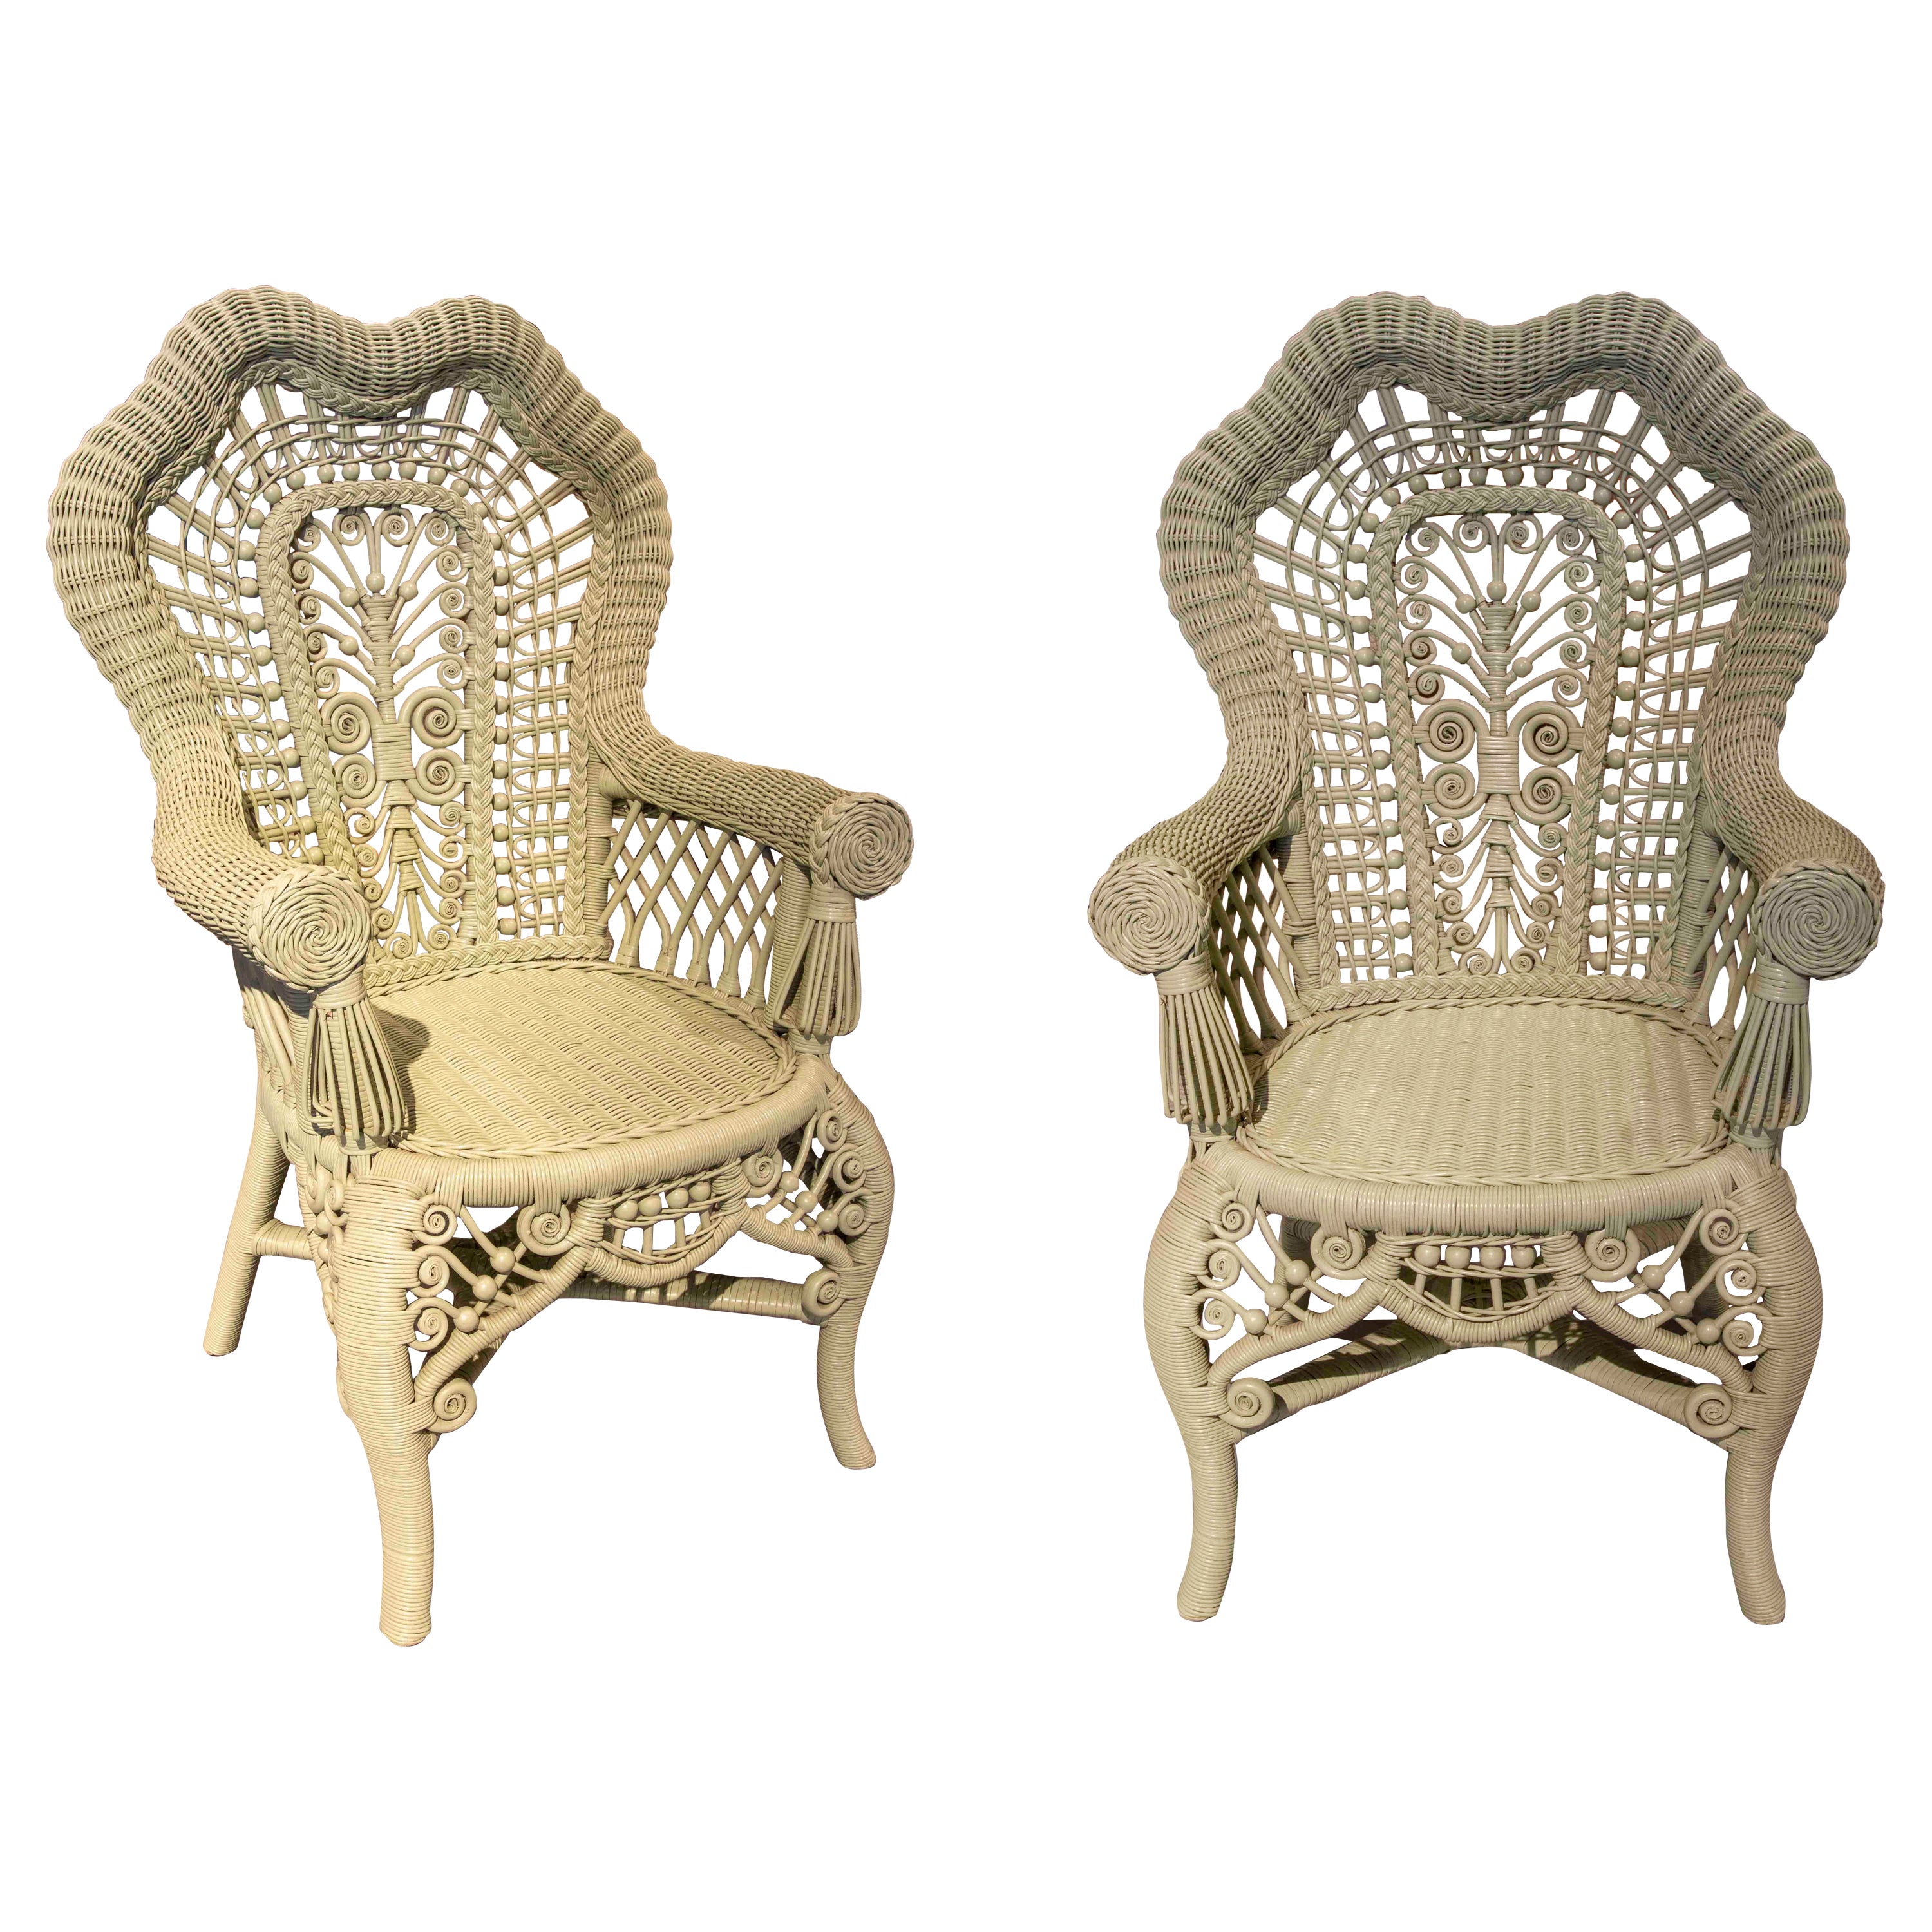 Pair of Wicker and Wooden Armchairs Painted in Green 